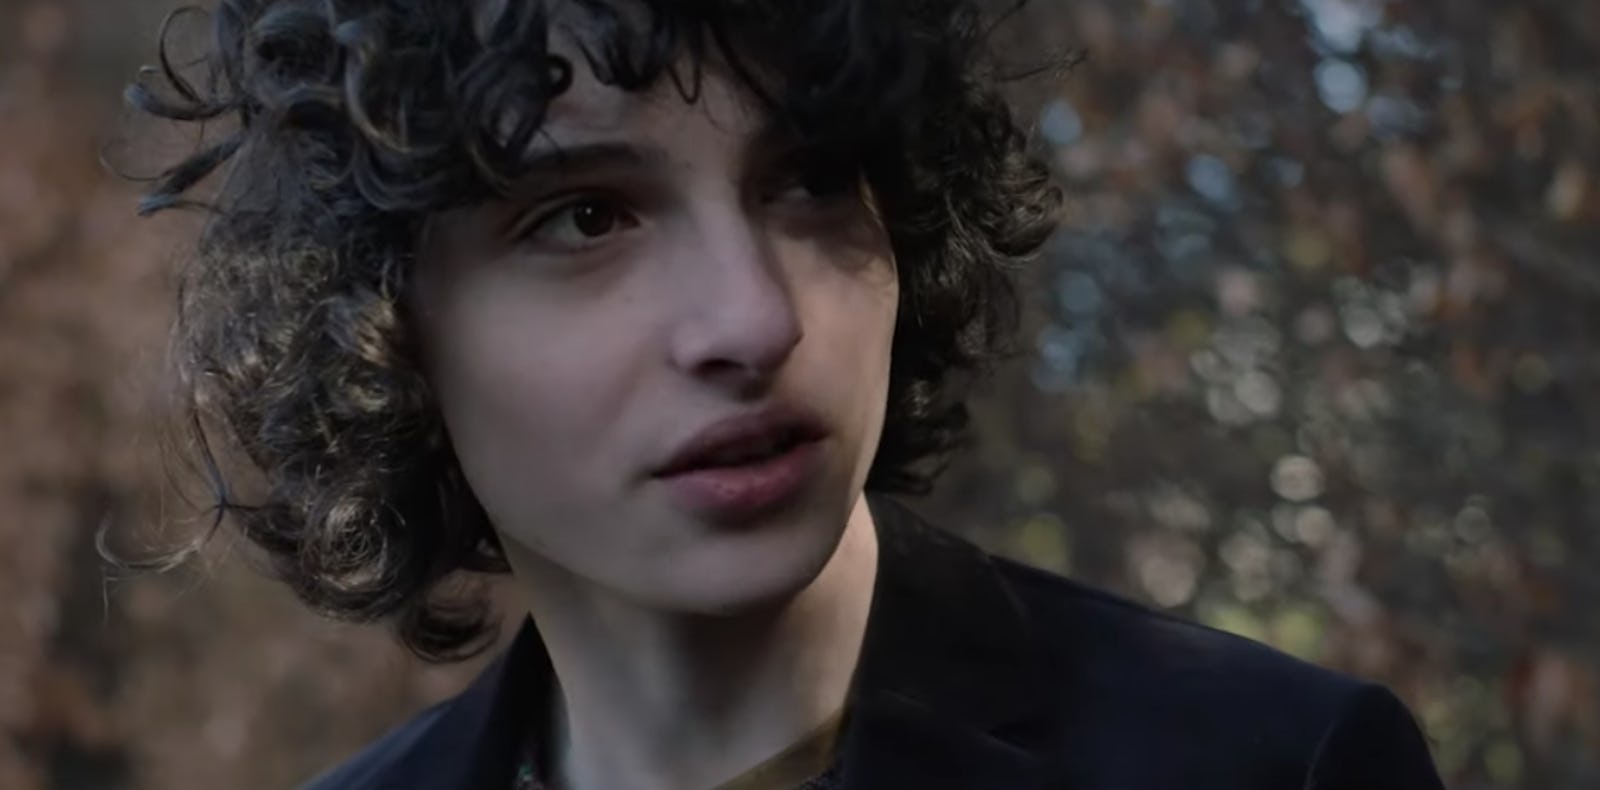 The Turning Trailer Features An Intensely Creepy Finn Wolfhard — Video